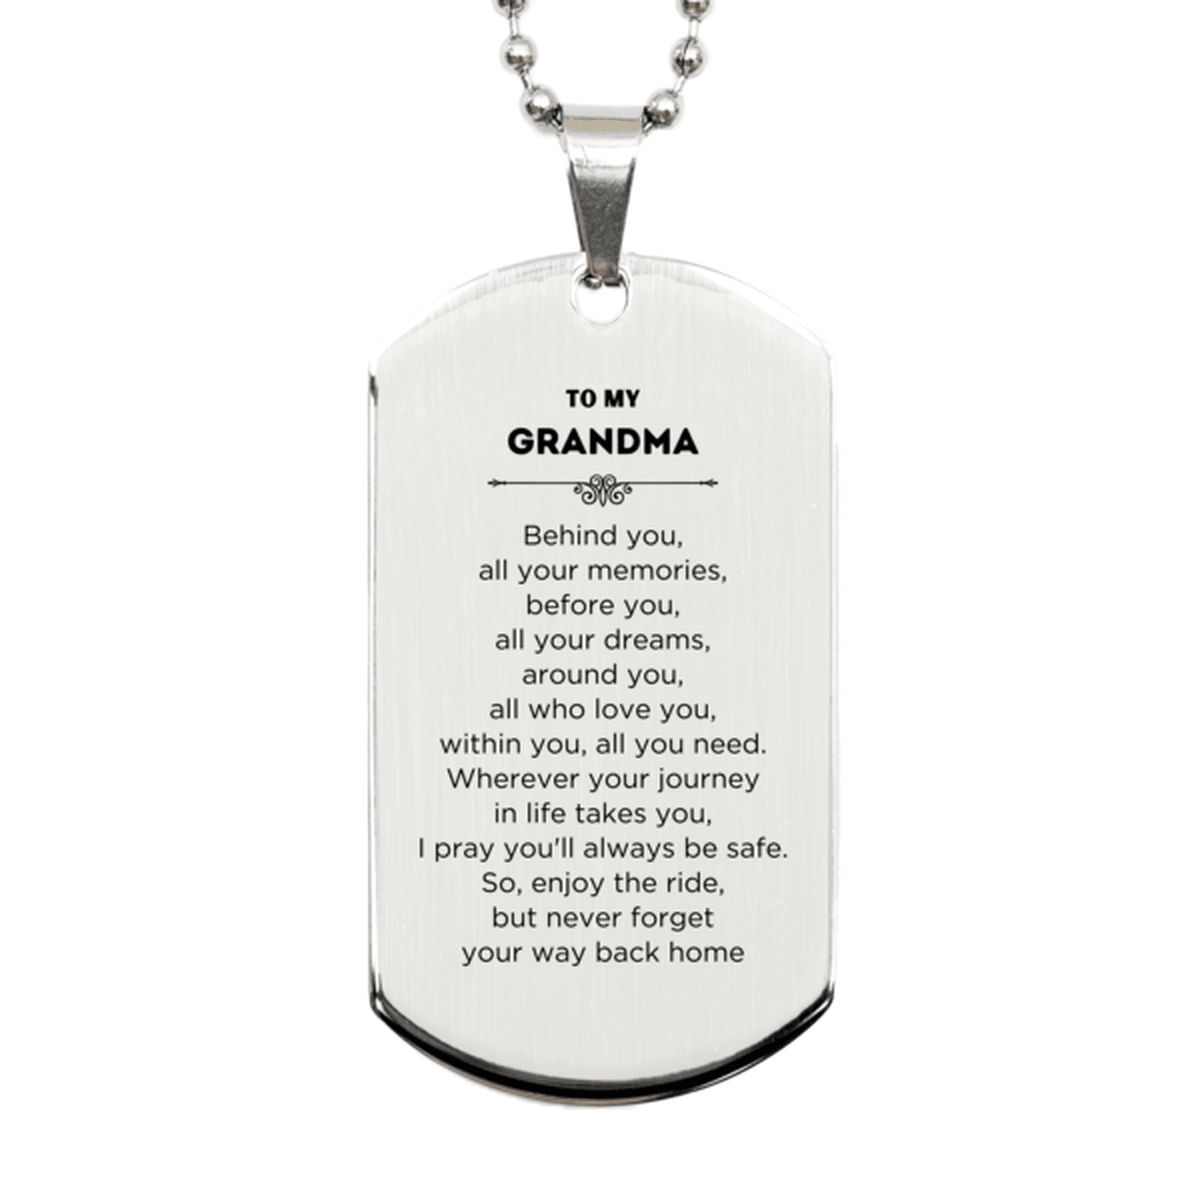 Grandma Silver Dog Tag Necklace Birthday Christmas Unique Gifts Behind you, all your memories, before you, all your dreams - Mallard Moon Gift Shop